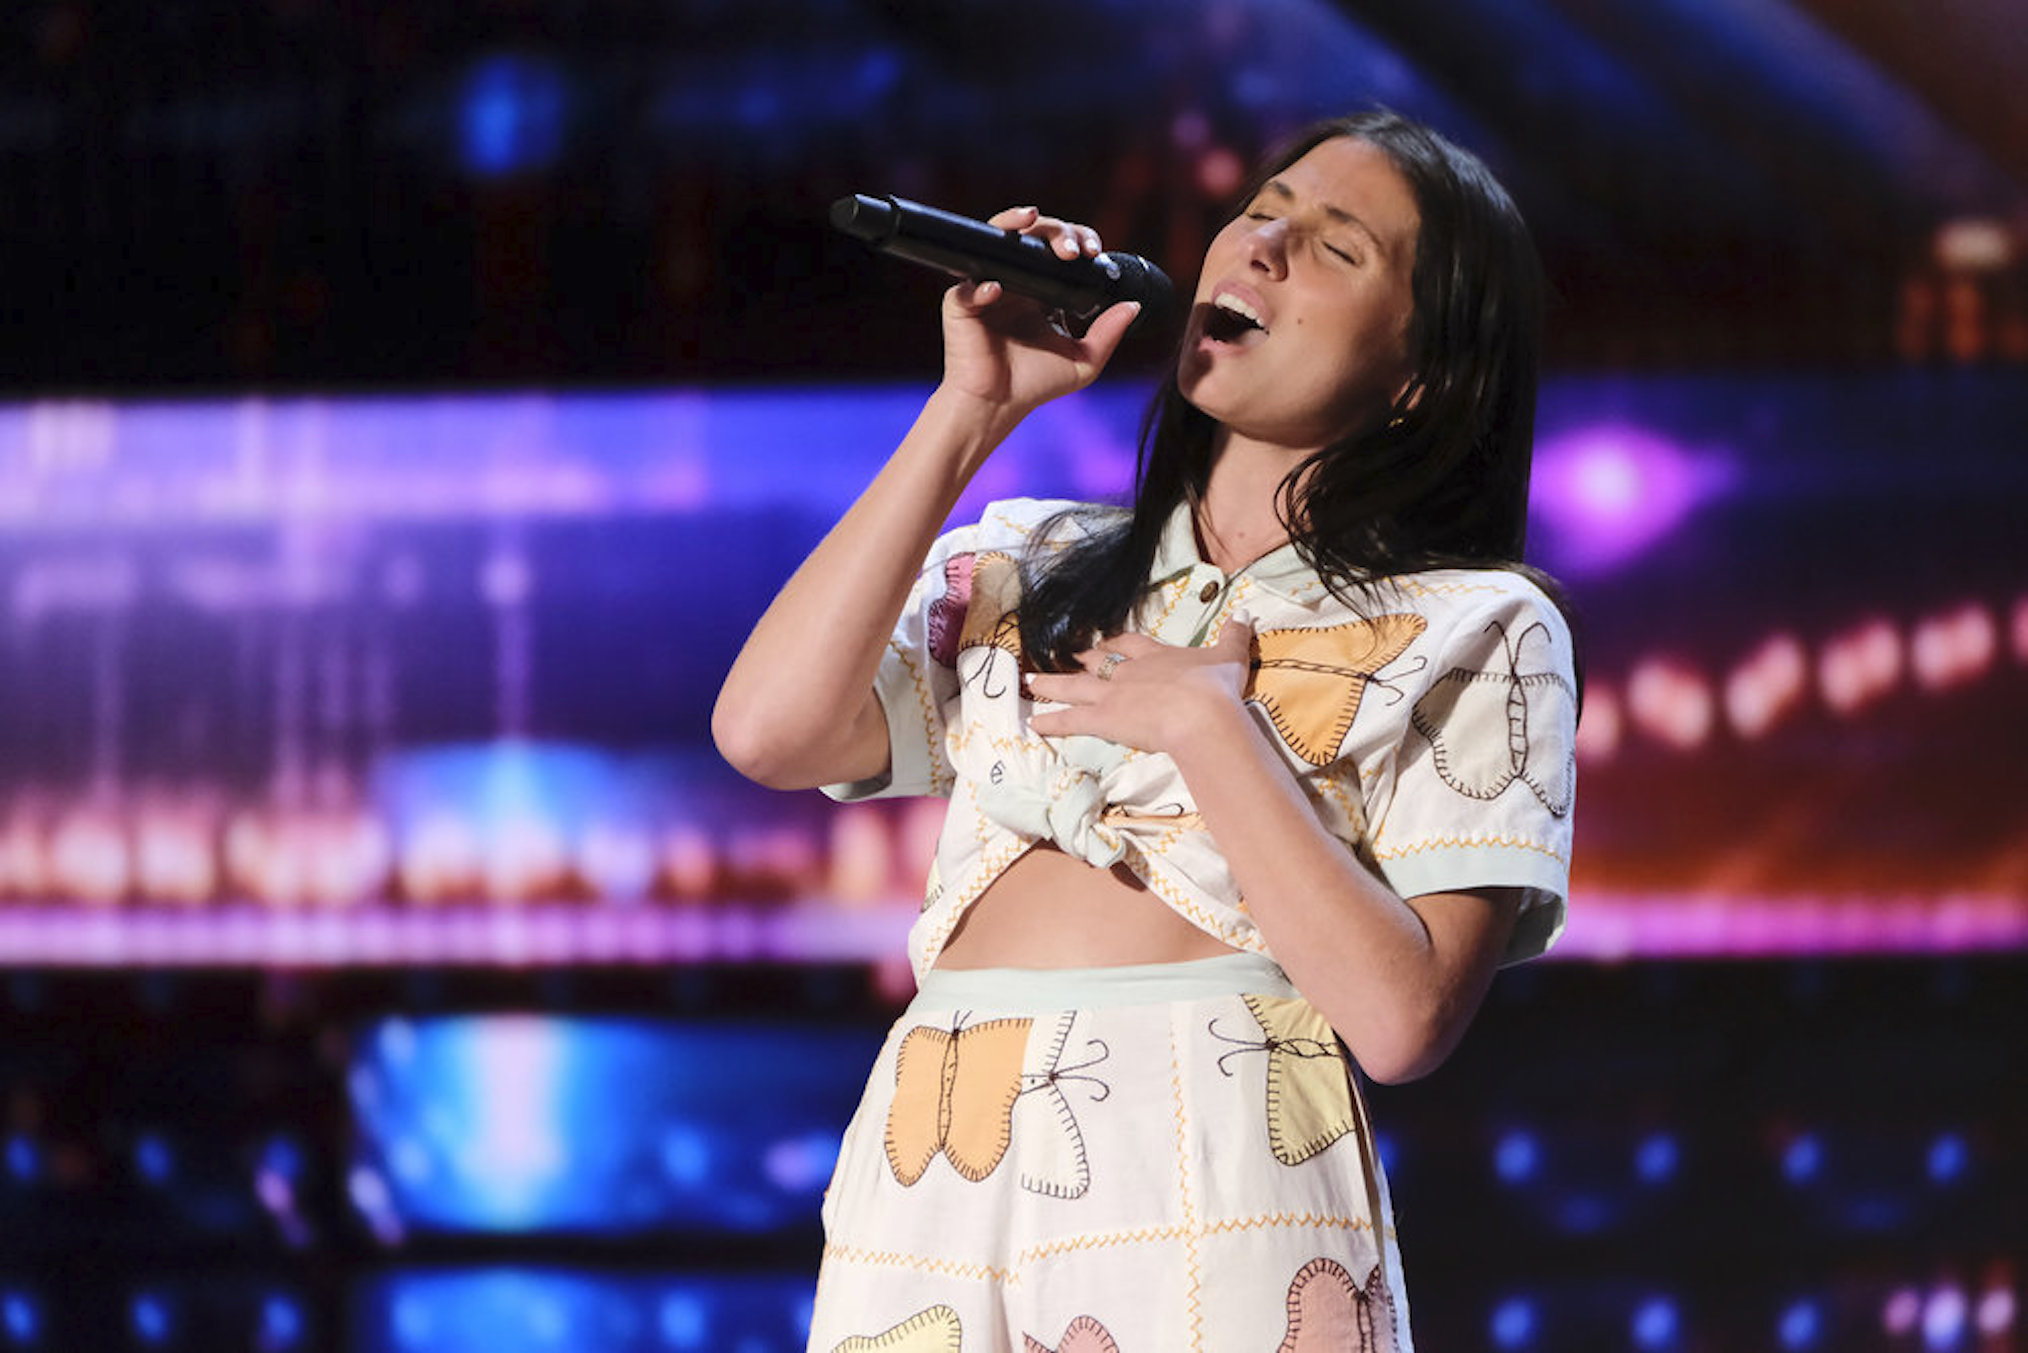 Lily Meola auditioning for America's Got Talent Season 17 Episode 5